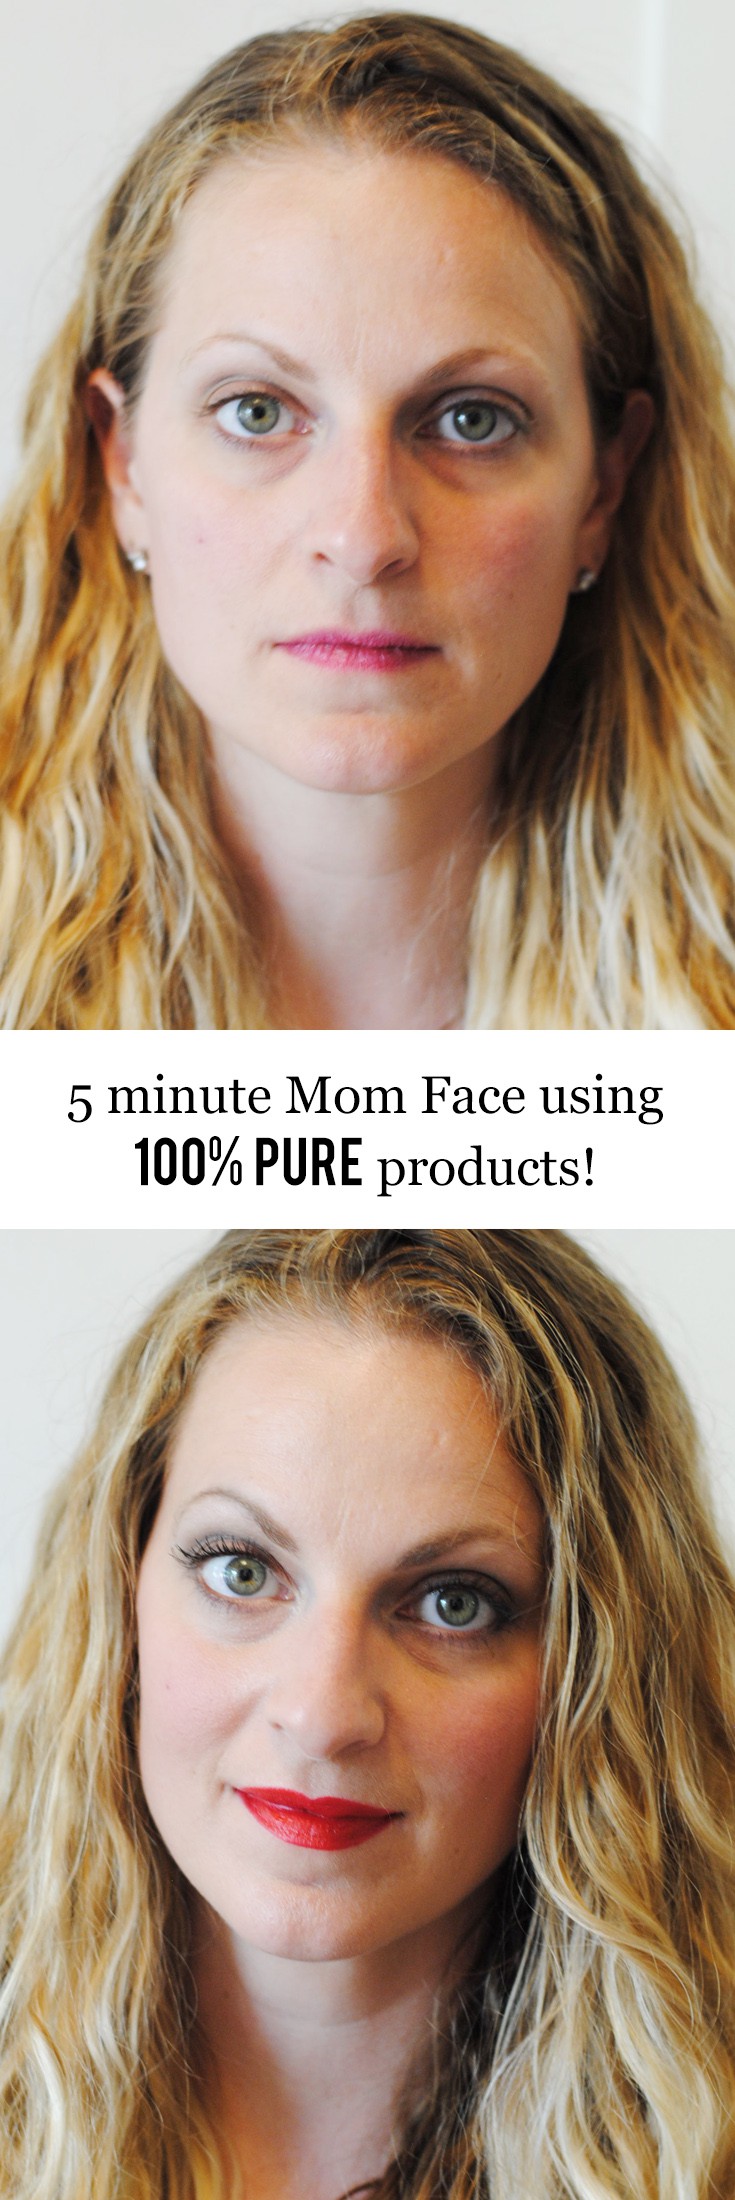 5 Minute Mom Face with 100% Pure